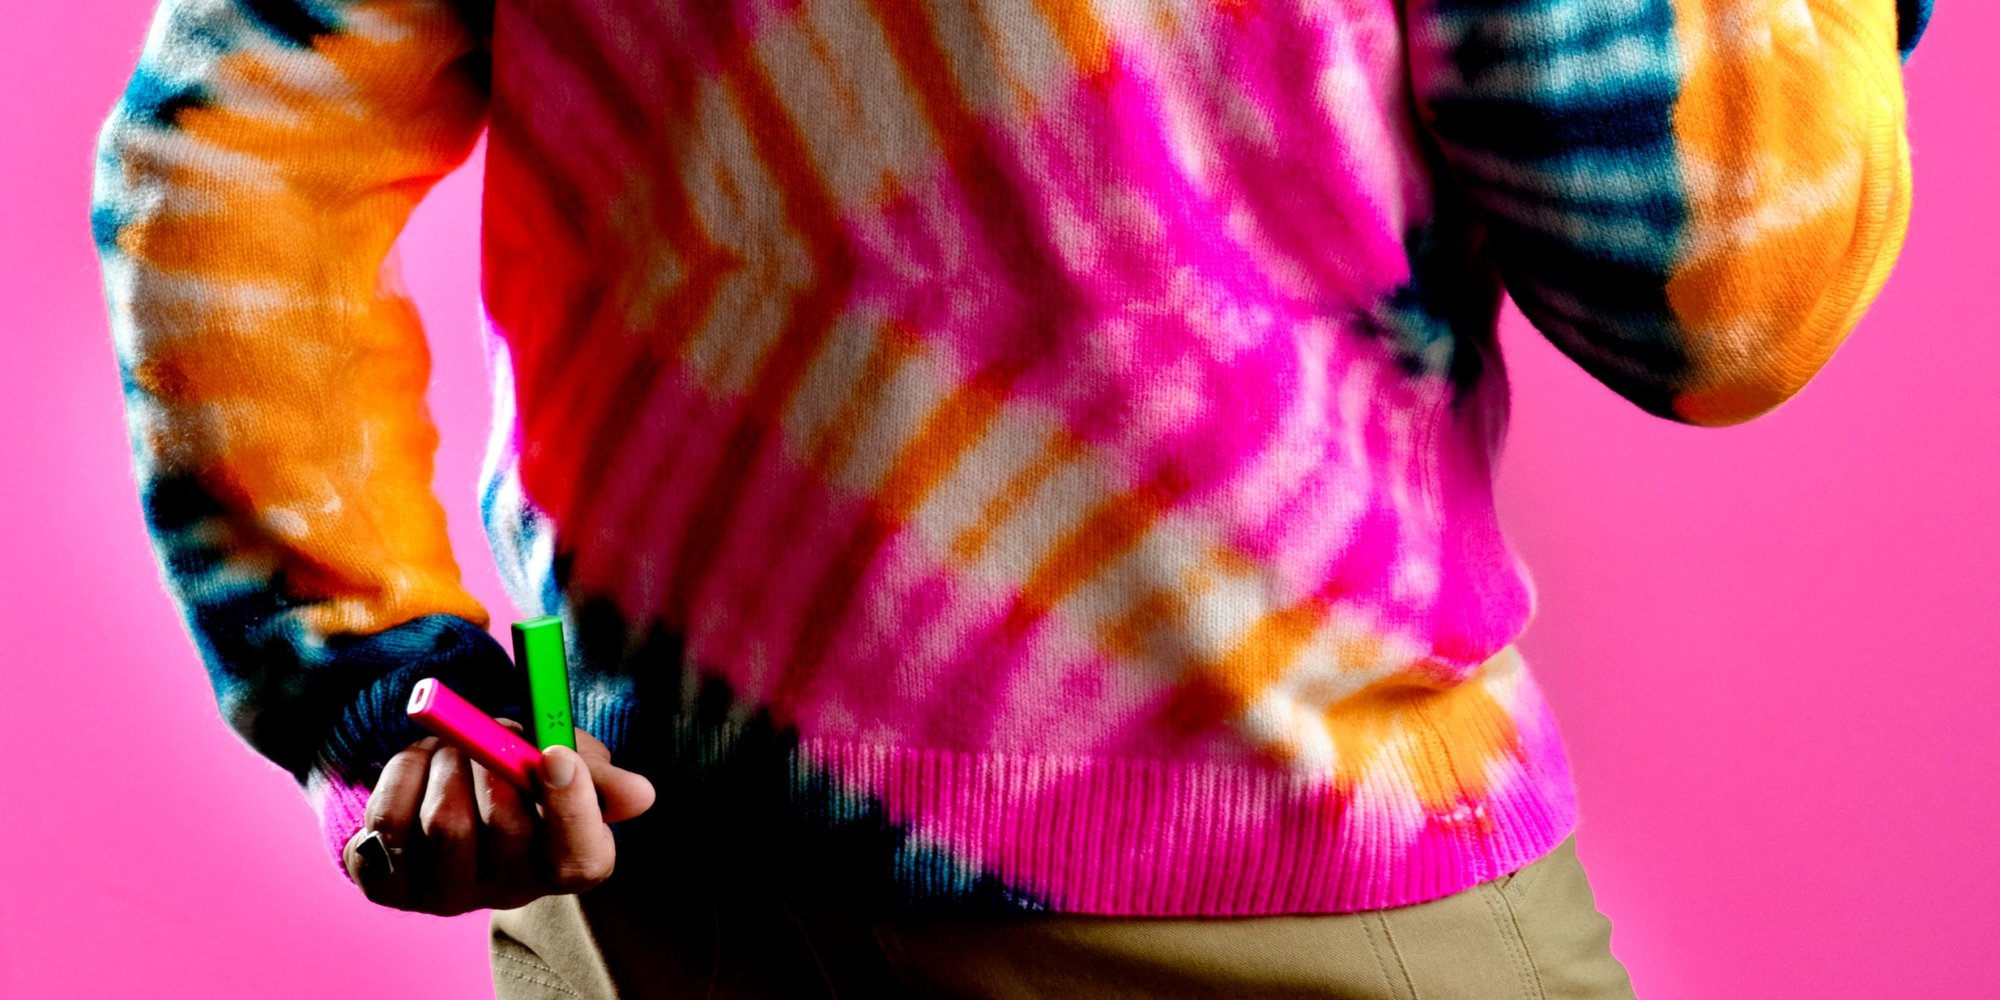 Person holding a couple of PAX Era vaporizers behind their back with a tie dyed sweater